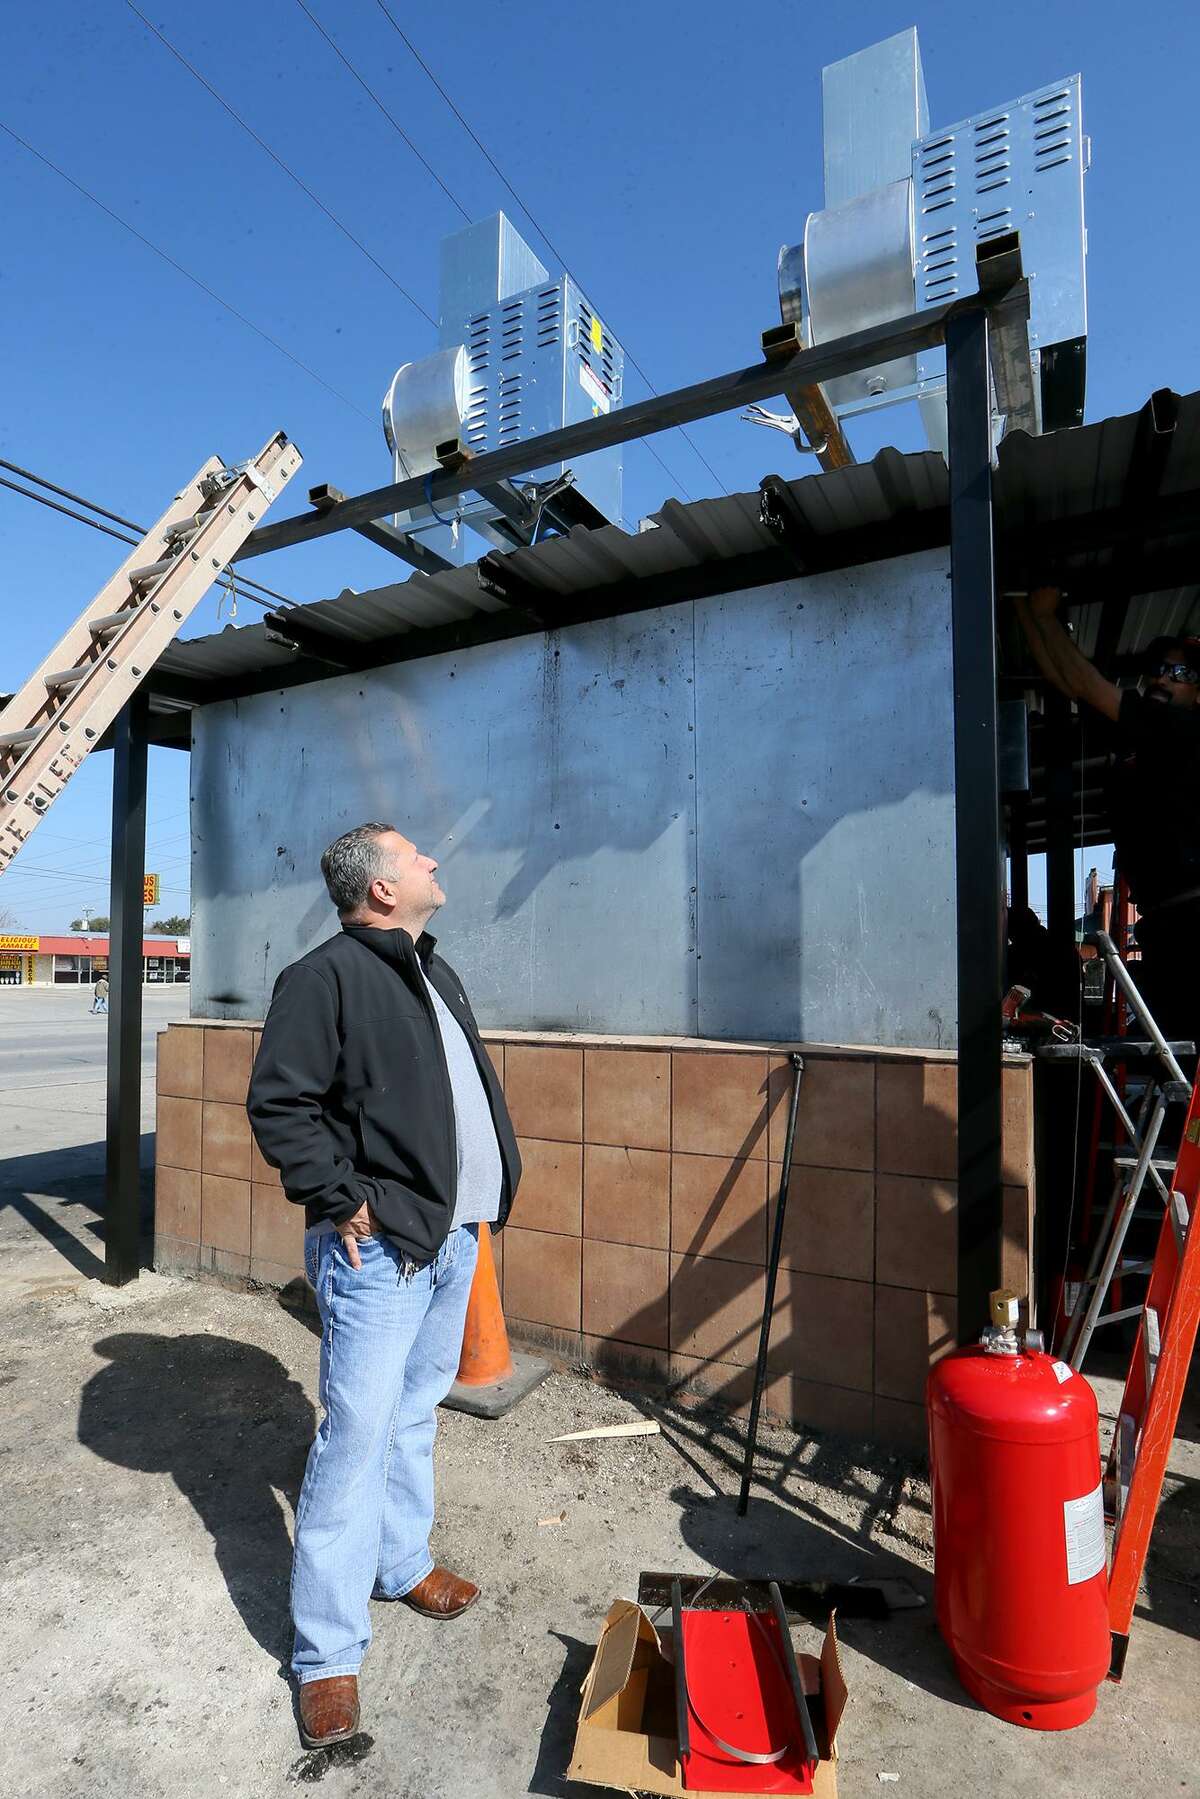 Owner Fank Garcia inspects two high velocity exhaust fans installed on the smokehouse at Pollos Asados Los Norteños in Feb. 2016. Garcia installed new fire suppression and exhaust systems, but it wasn’t enough to keep government officials from shutting down the restaurant.